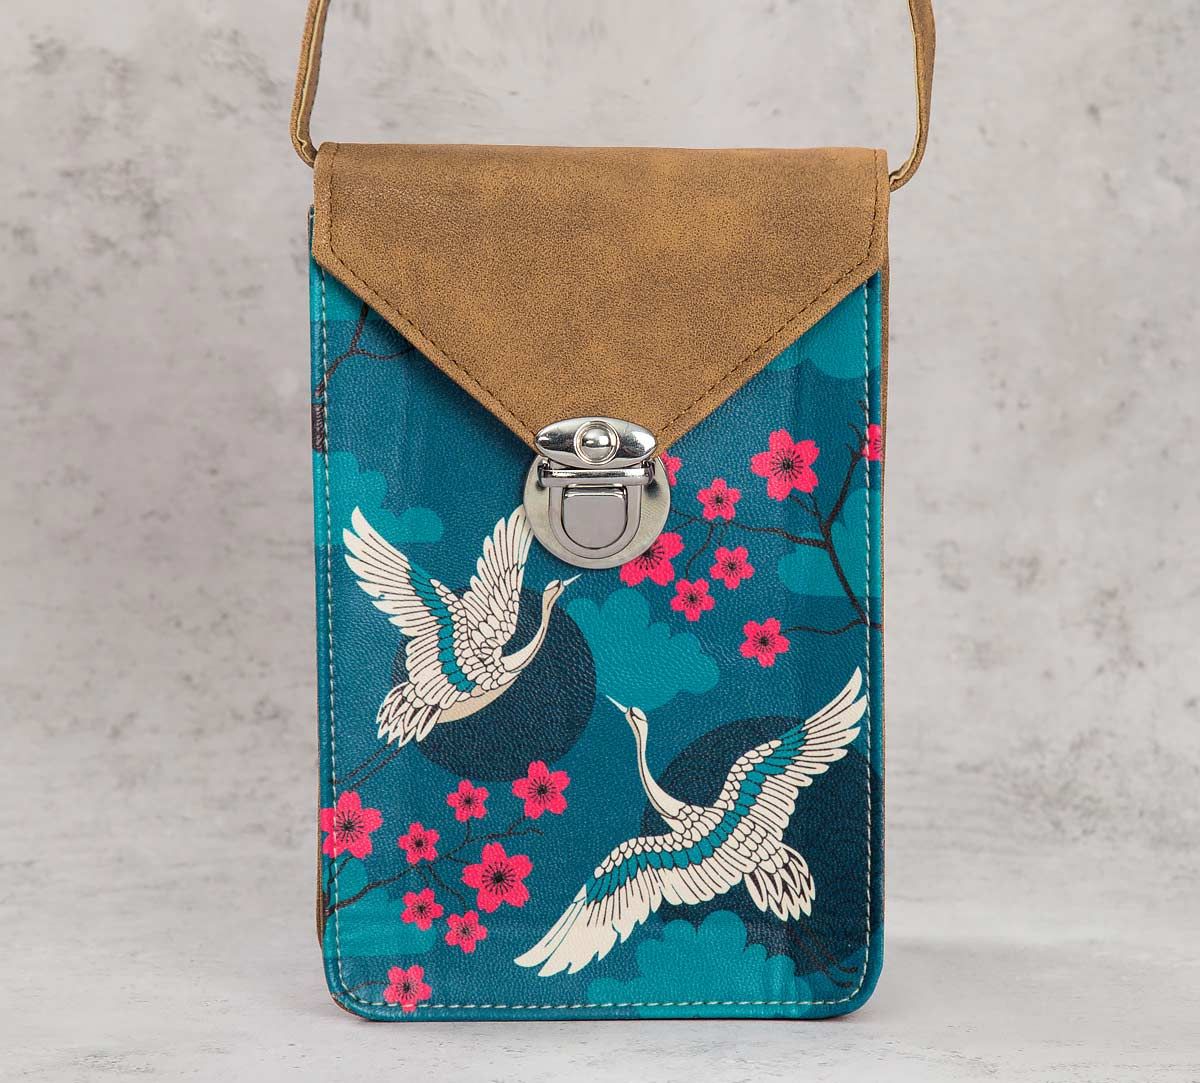 Women's Sling Handmade Bags For Females-Cotton Fabric - Style Bite | Women  accessories bags, Bags, Handmade bags